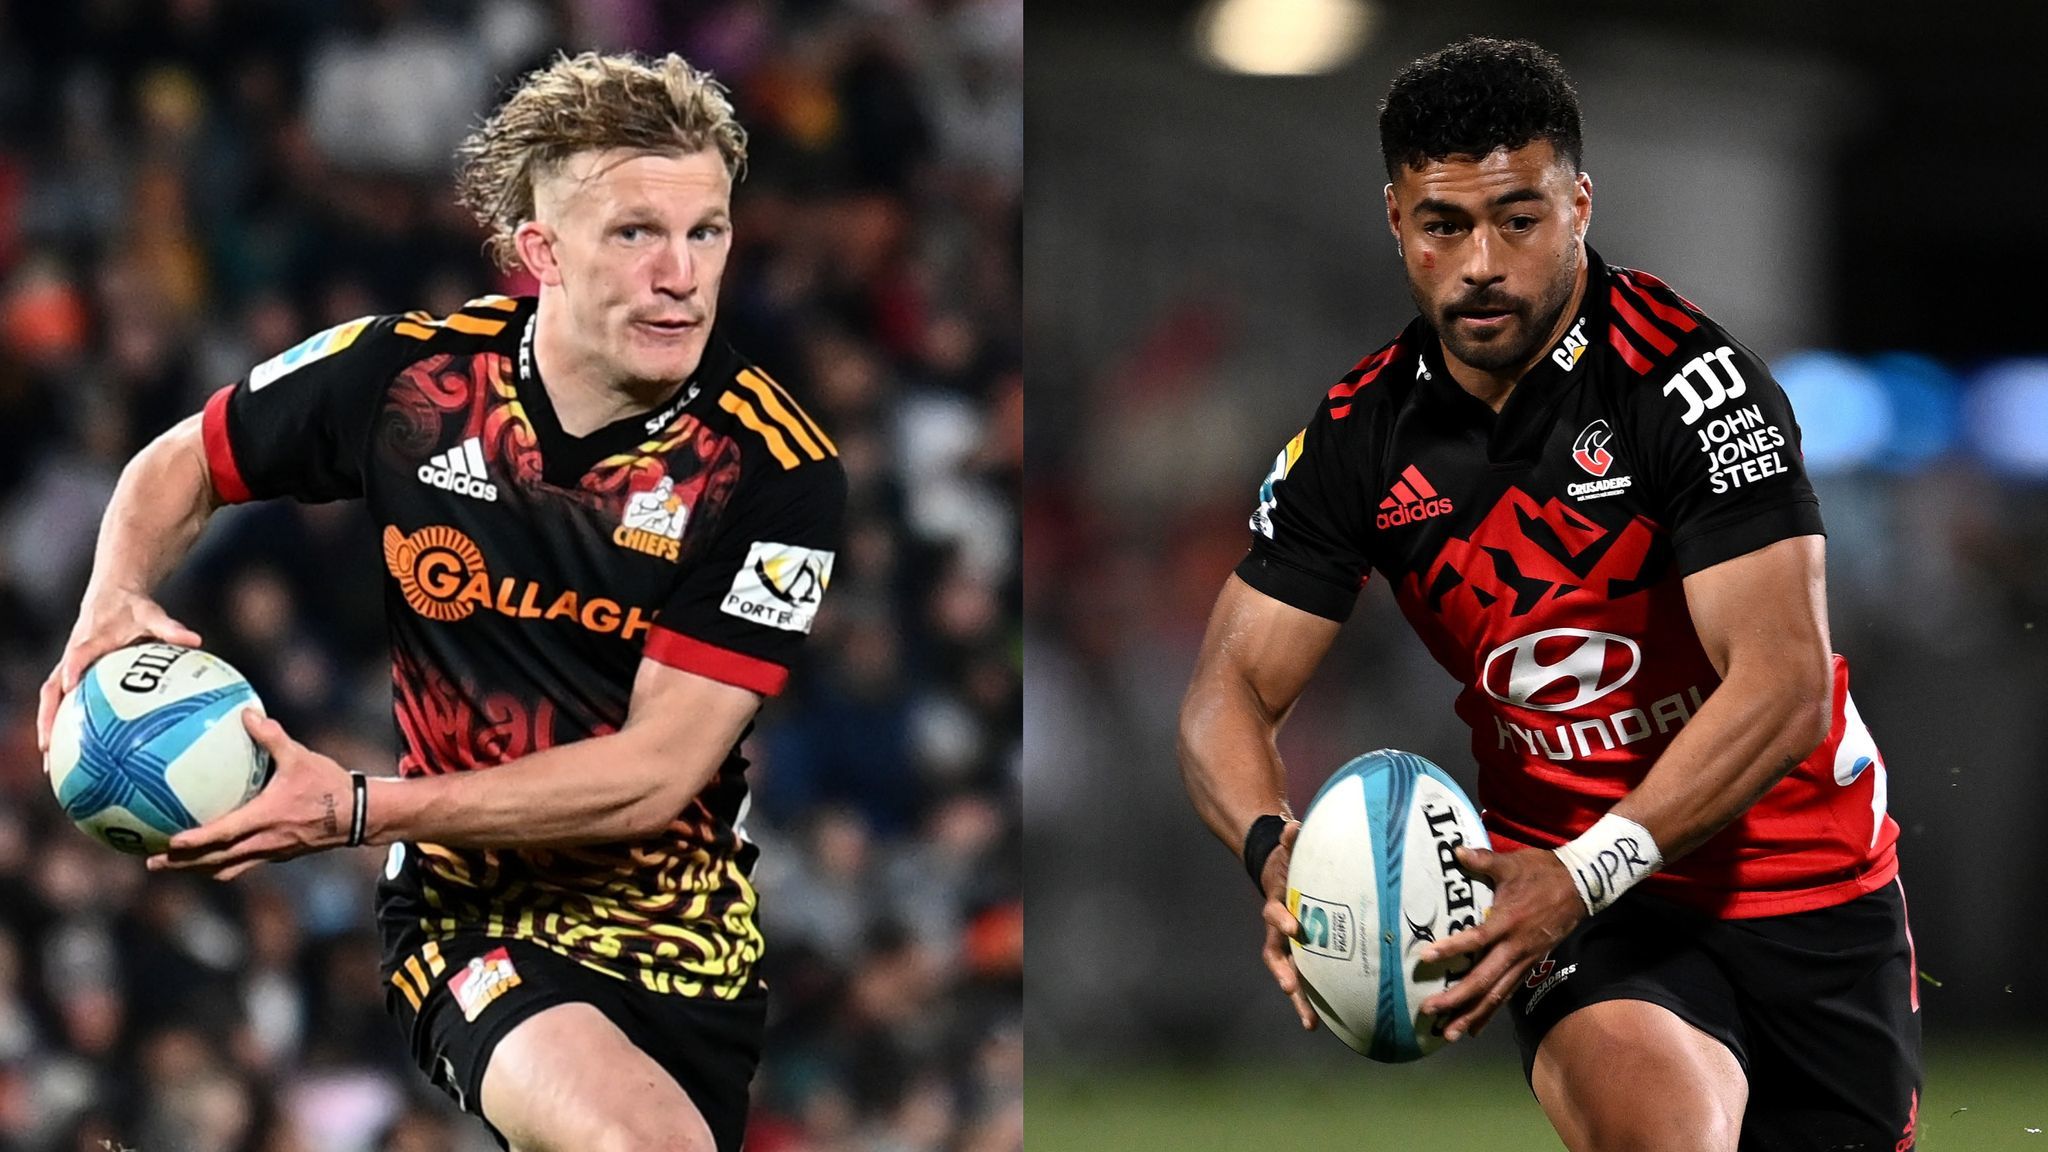 2023 Super Rugby Pacific: Round 12 Preview & Betting Tips